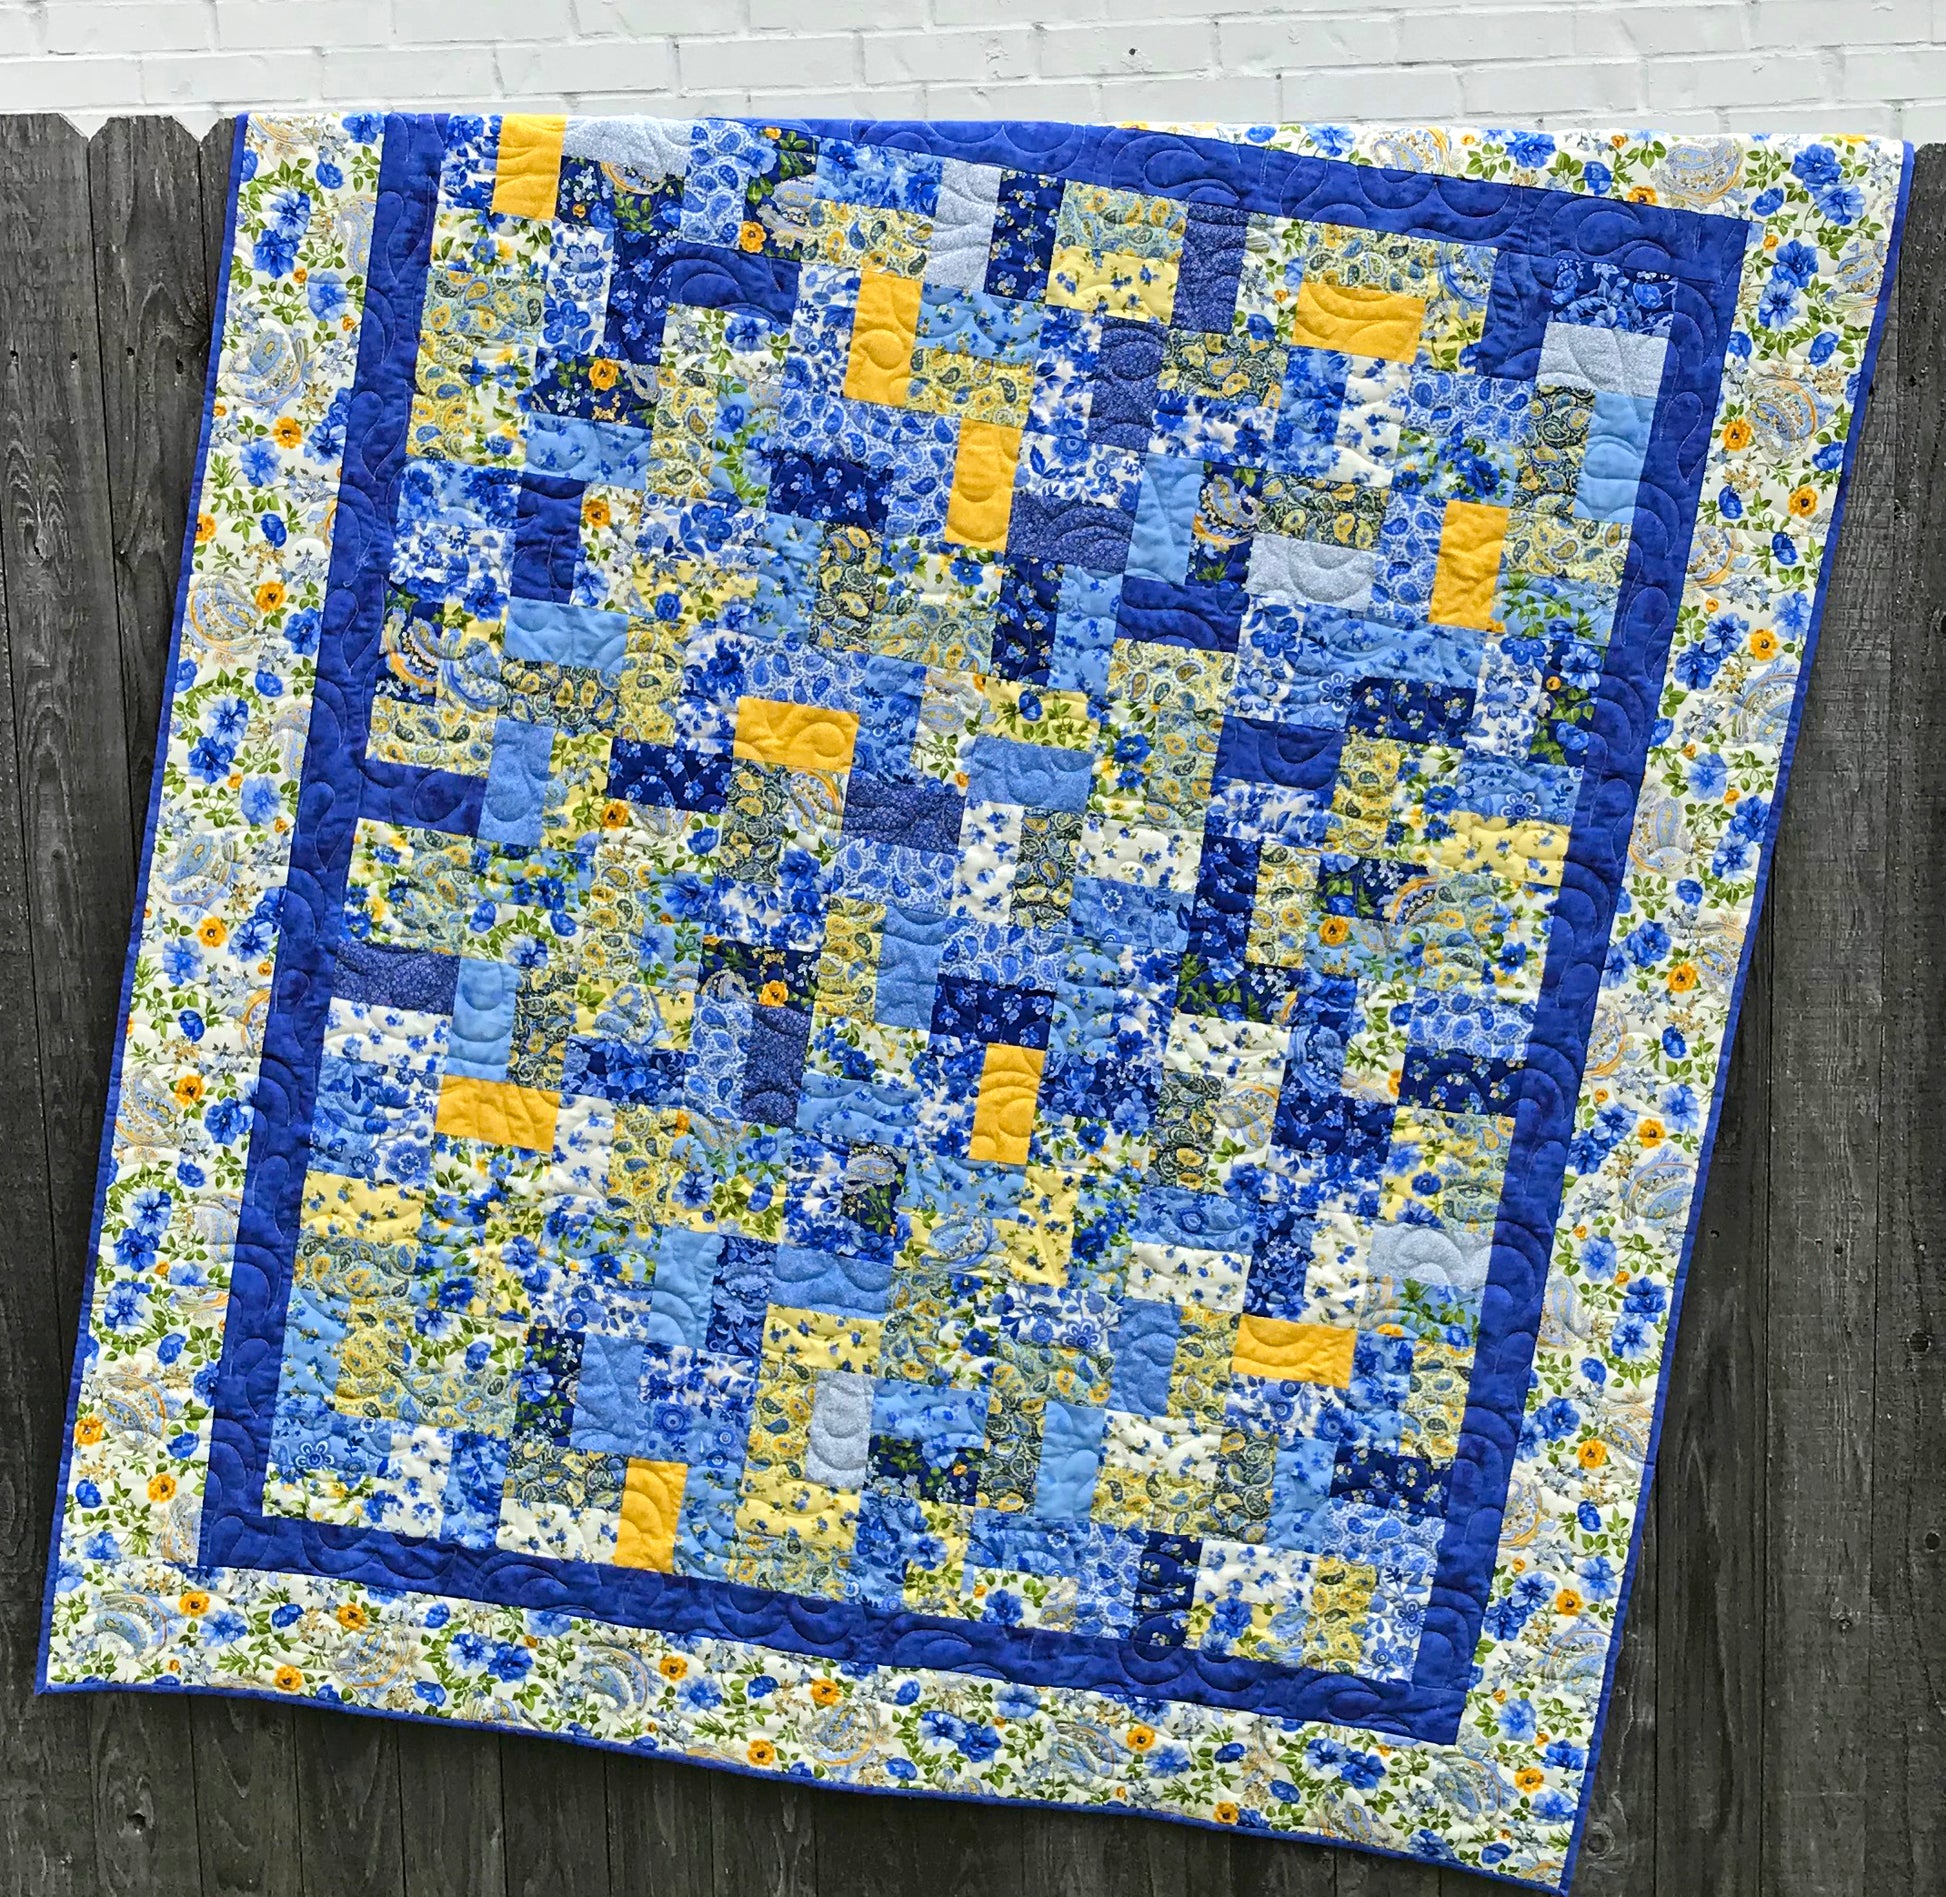 Cobblestone Charm Quilt Pattern for Charm Squares - Digital Quilt Pattern - Handmade Quilts, Digital Patterns, and Home Décor items online - Cuddle Cat Quiltworks